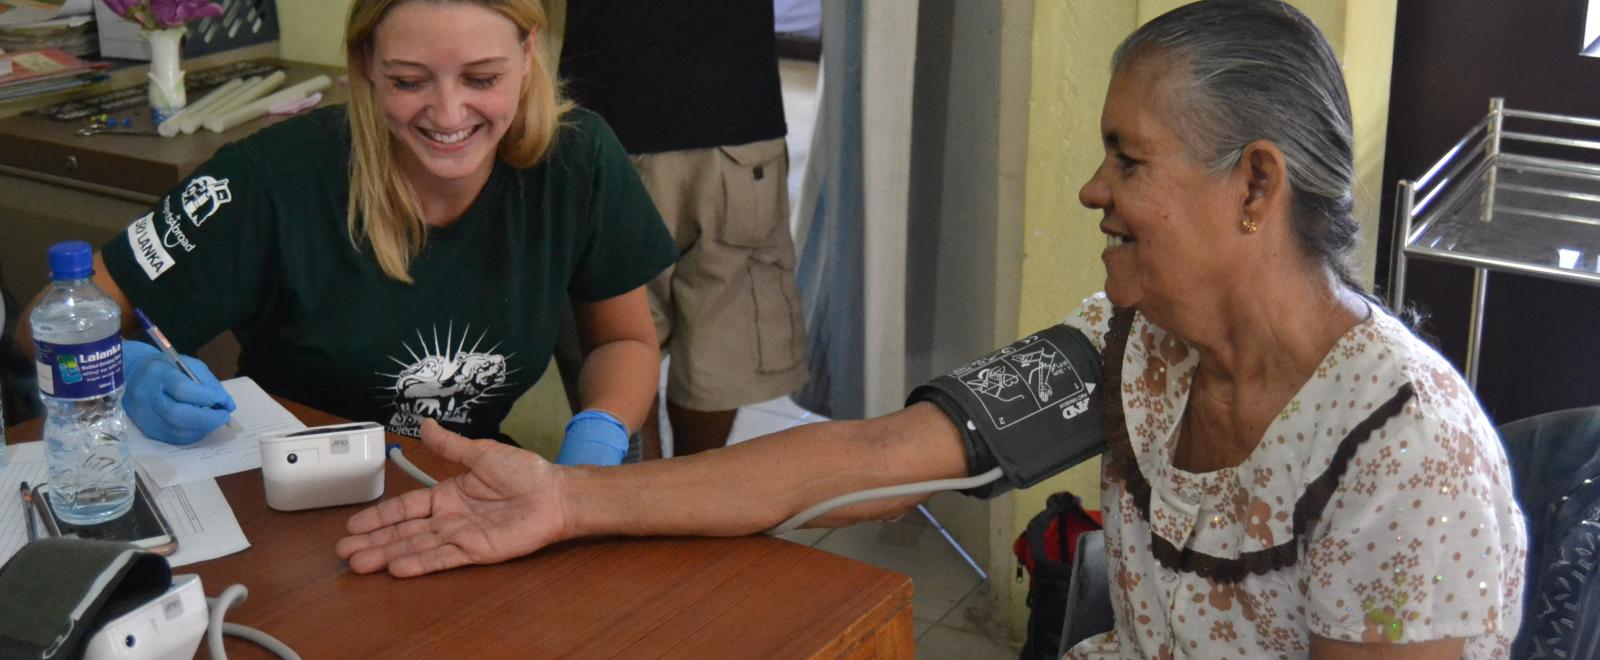 A student doing a medical internship for high school students in Sri Lanka checks blood pressure levels for a local woman.  